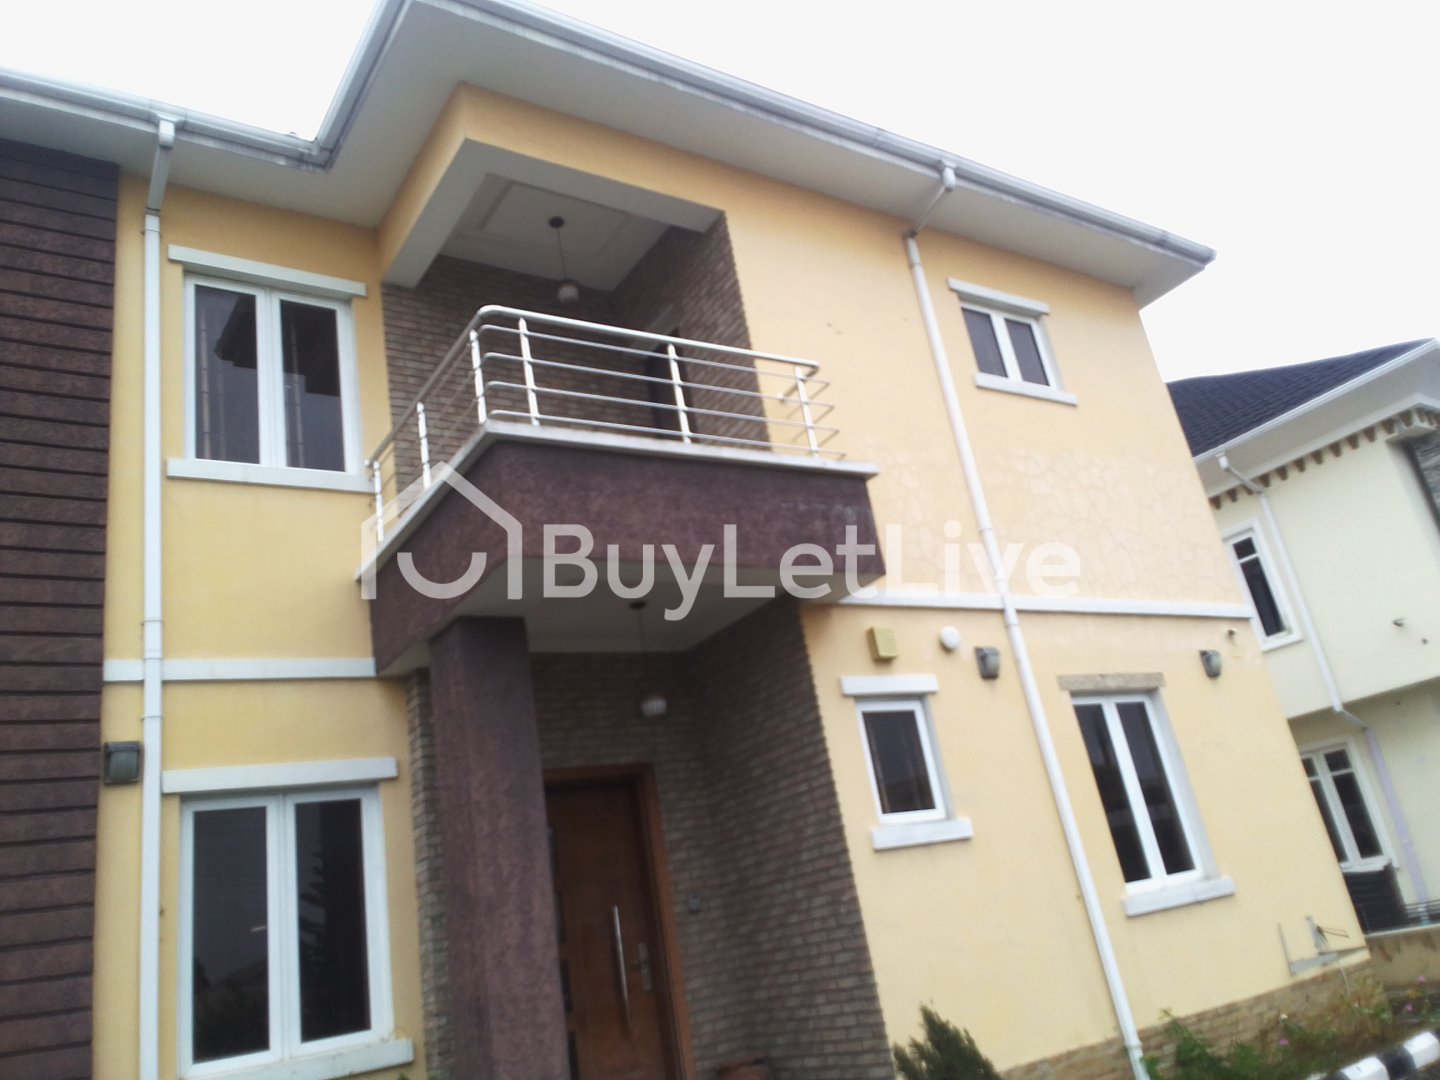 5 bedrooms Detached Duplex with 2Rooms Bq for lease at chevron